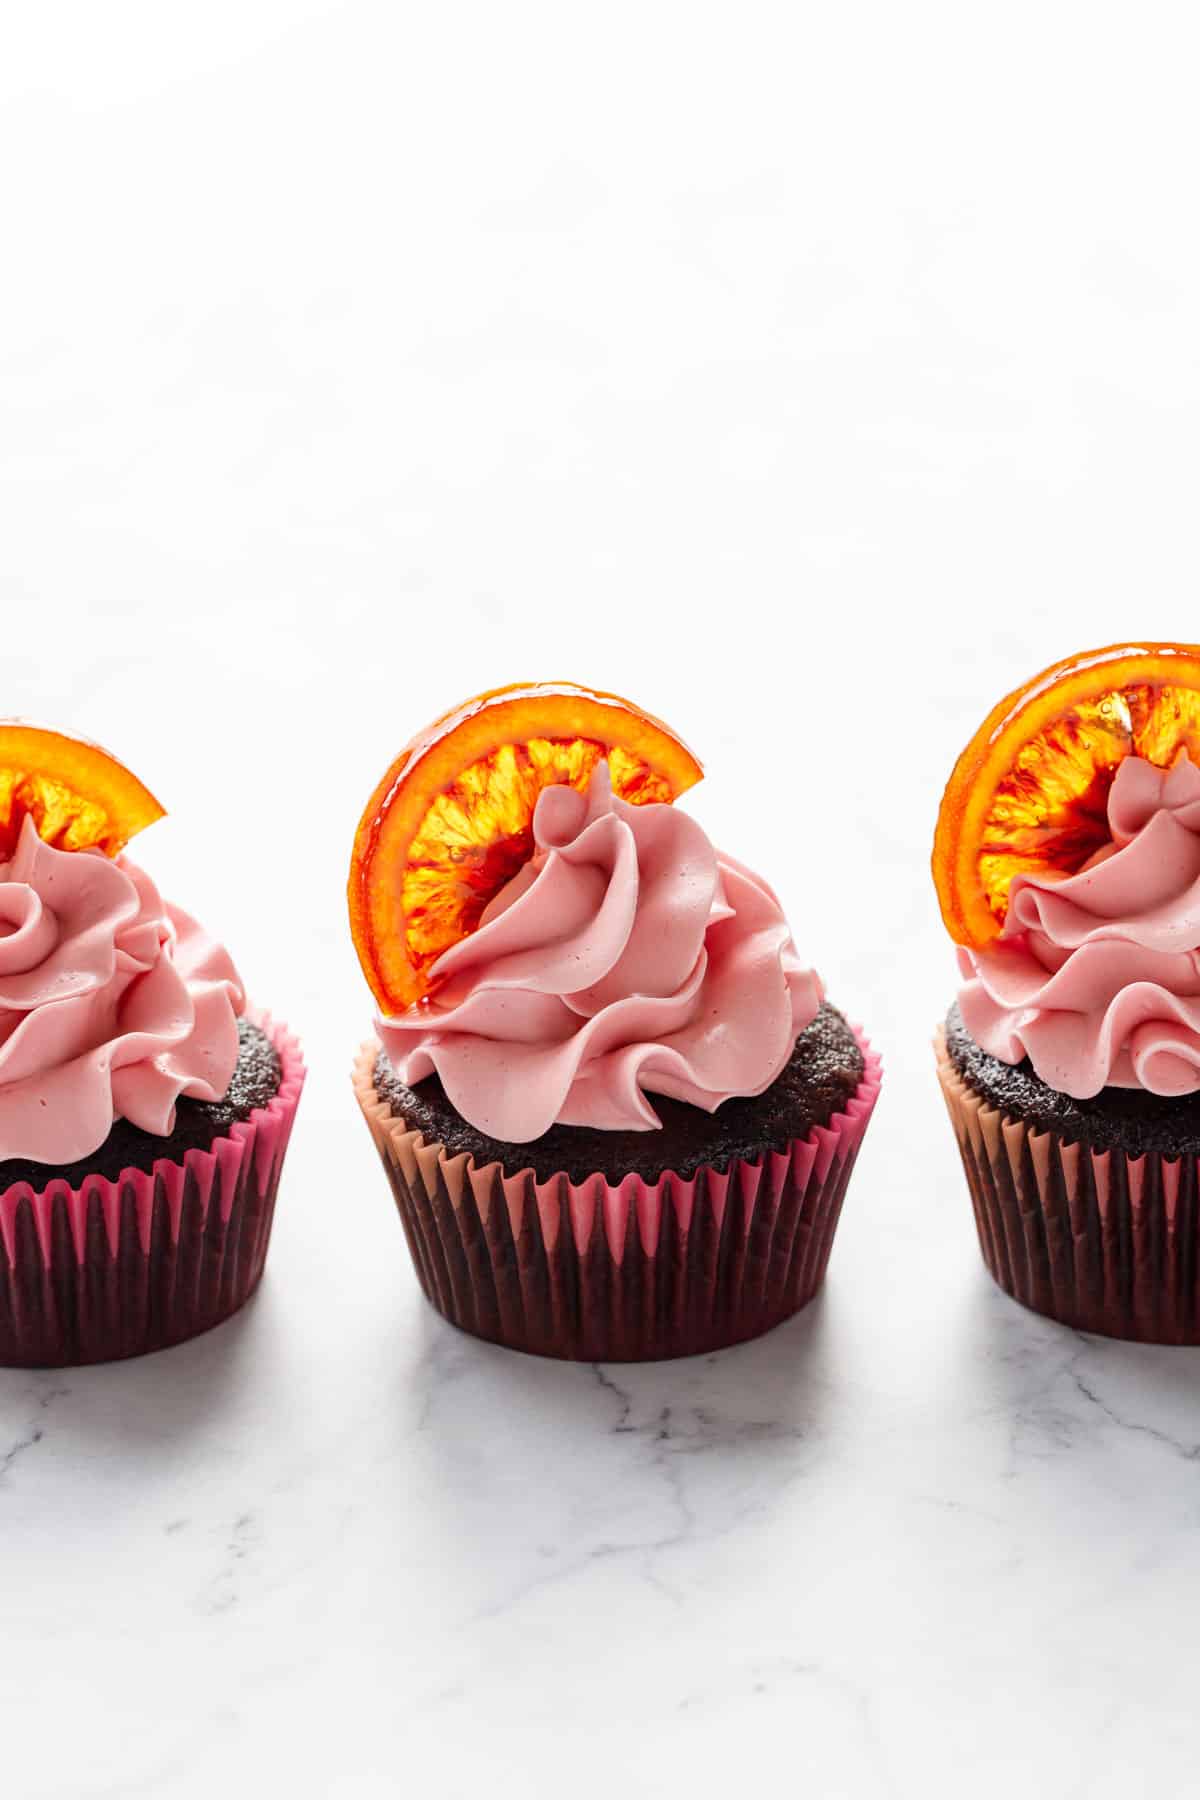 Row of three Chocolate Olive Oil & Blood Orange Cupcakes, backlit on a white marble background, the light shining through the transparent orange slice decorations.